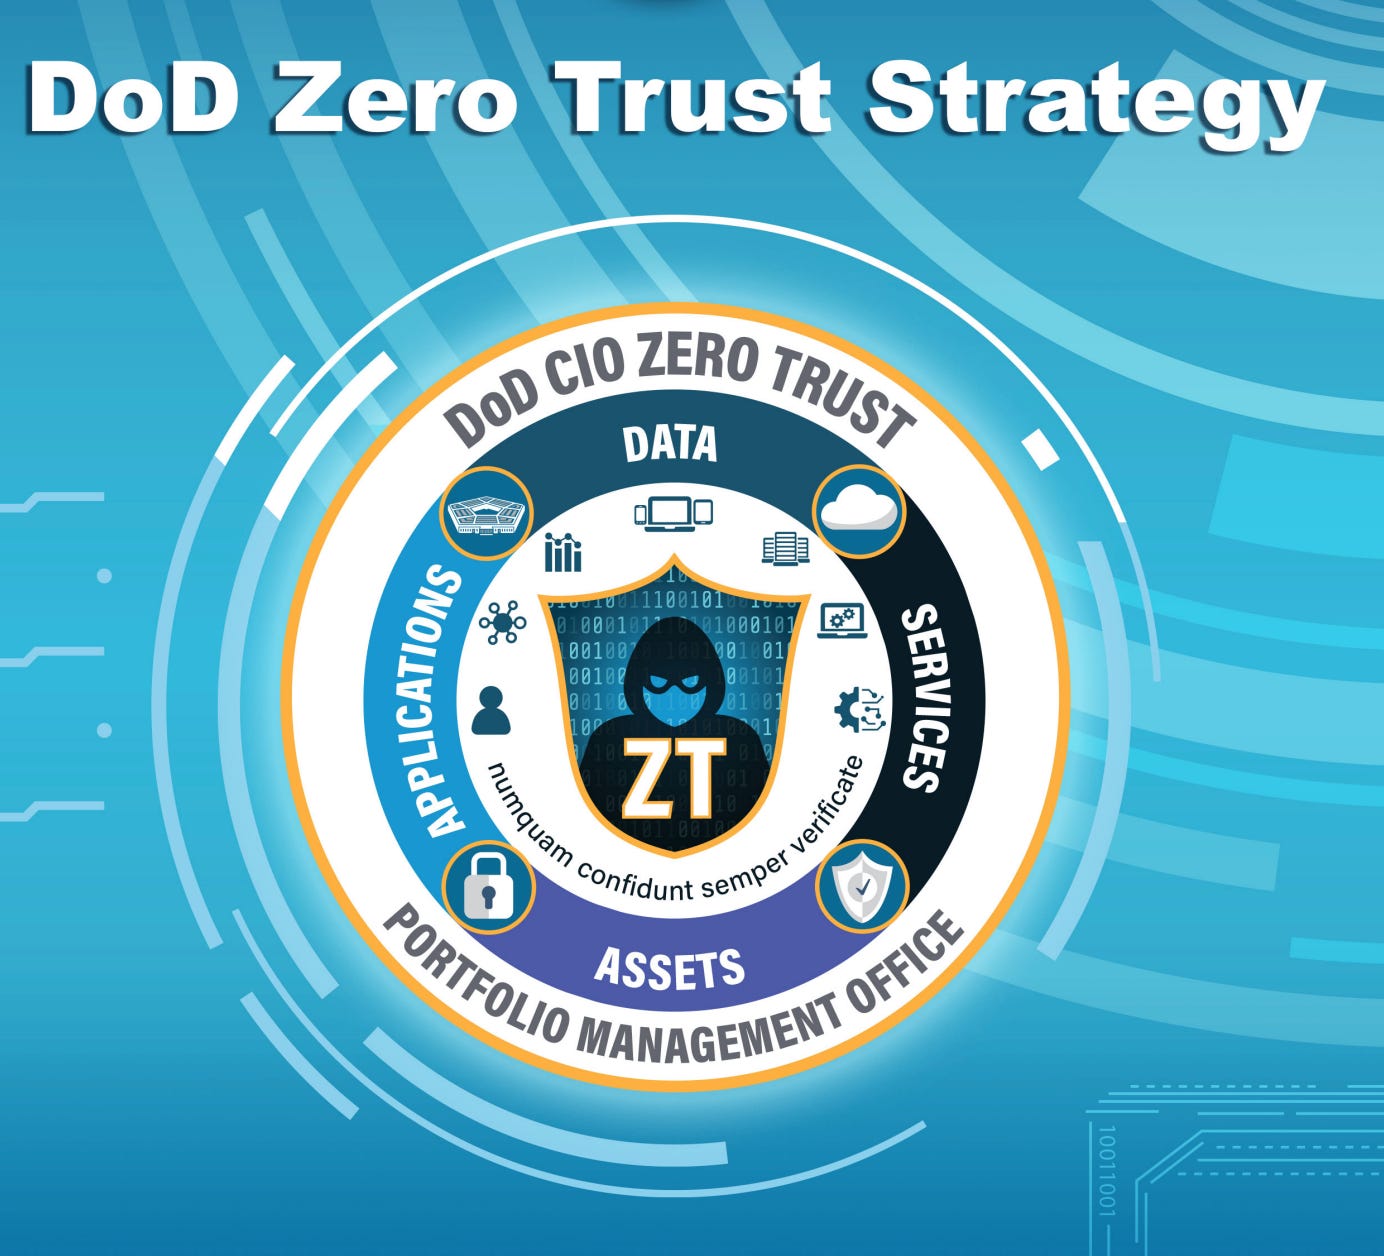 A look at the DoD's Zero Trust Strategy by Chris Hughes